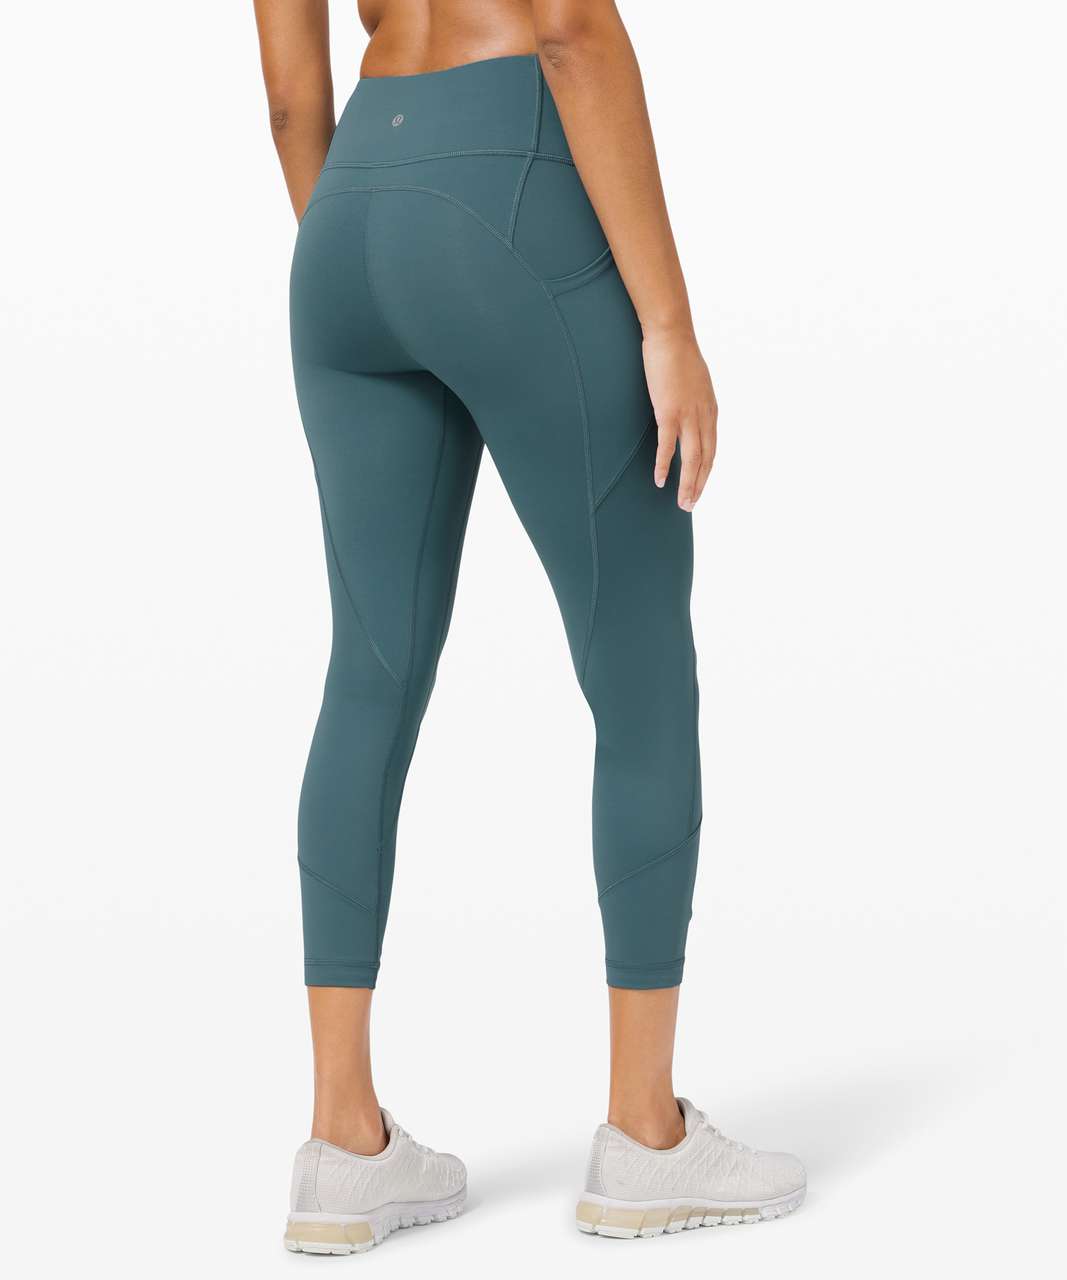 Lululemon All The Right Places Crop II *23" - Desert Teal